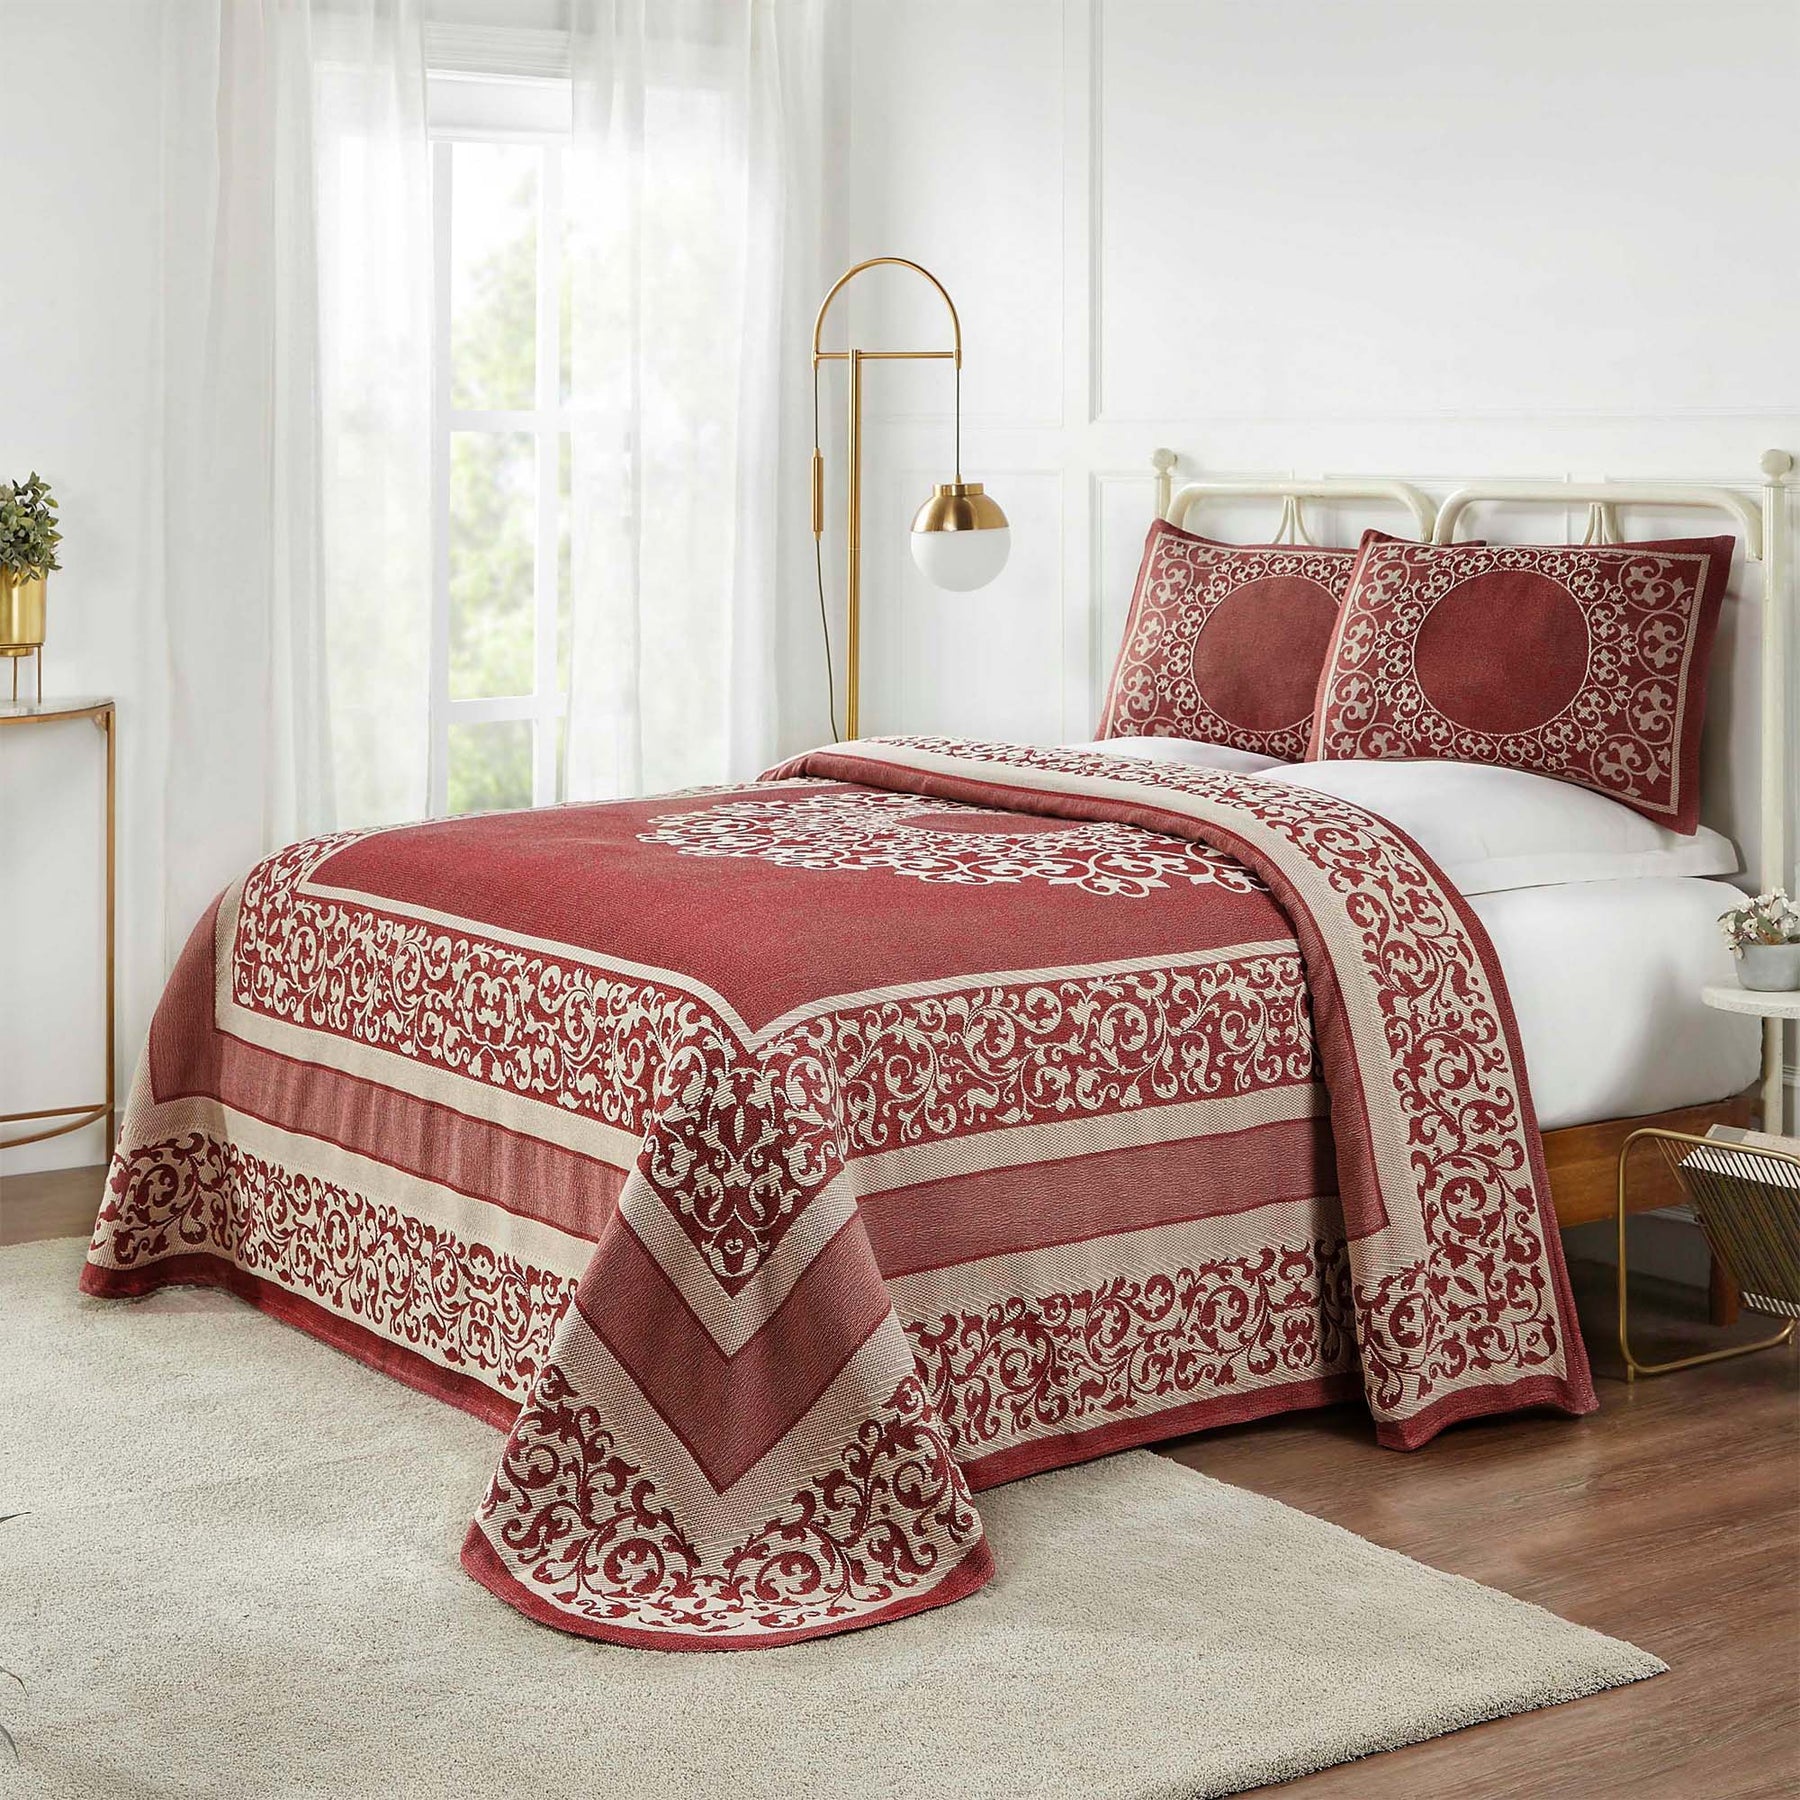 Superior Lyron Cotton Blend Woven Jacquard Vintage Floral Scroll Lightweight Bedspread and Sham Set  - Berry Red